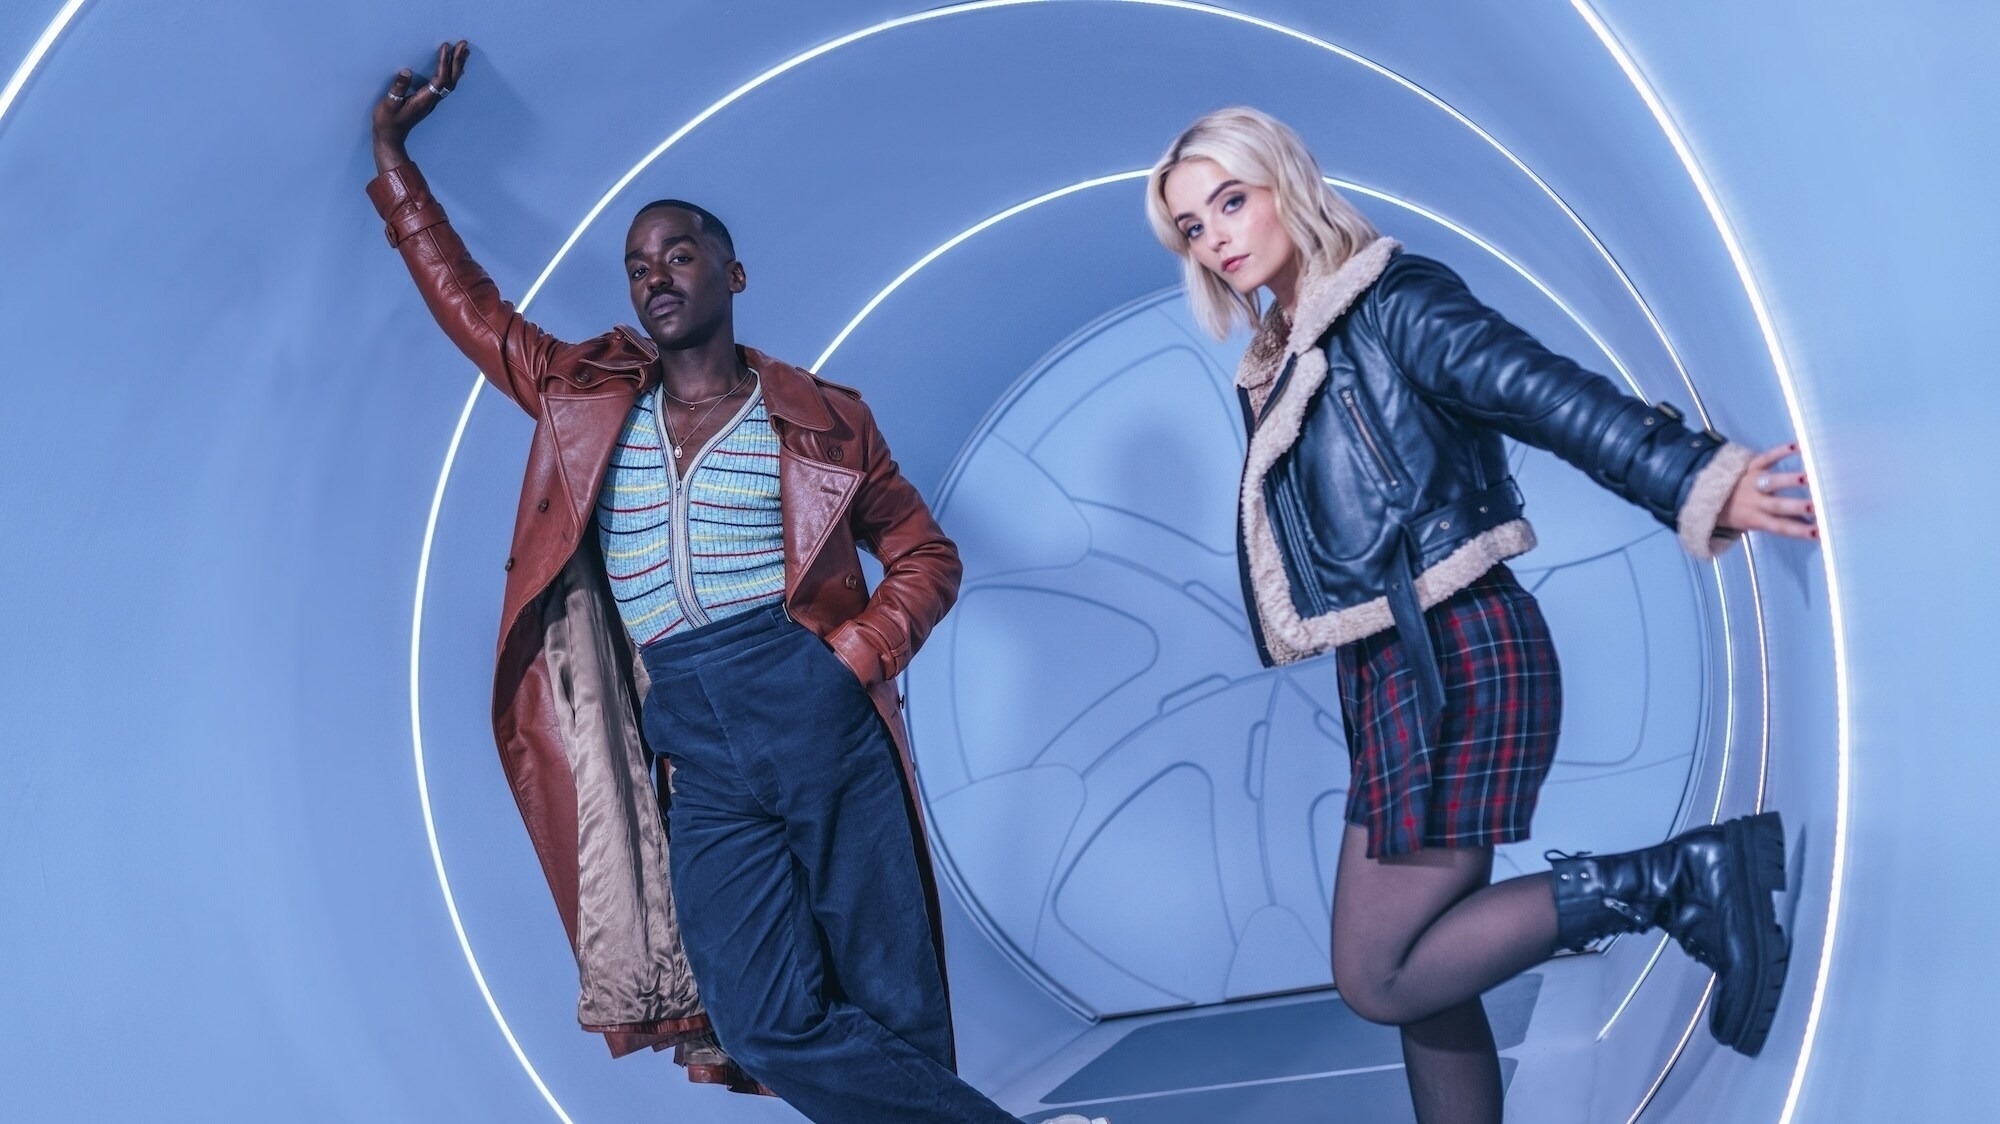 #Doctor Who: Season 14 Global Premiere Date Announced by Disney+ and BBC